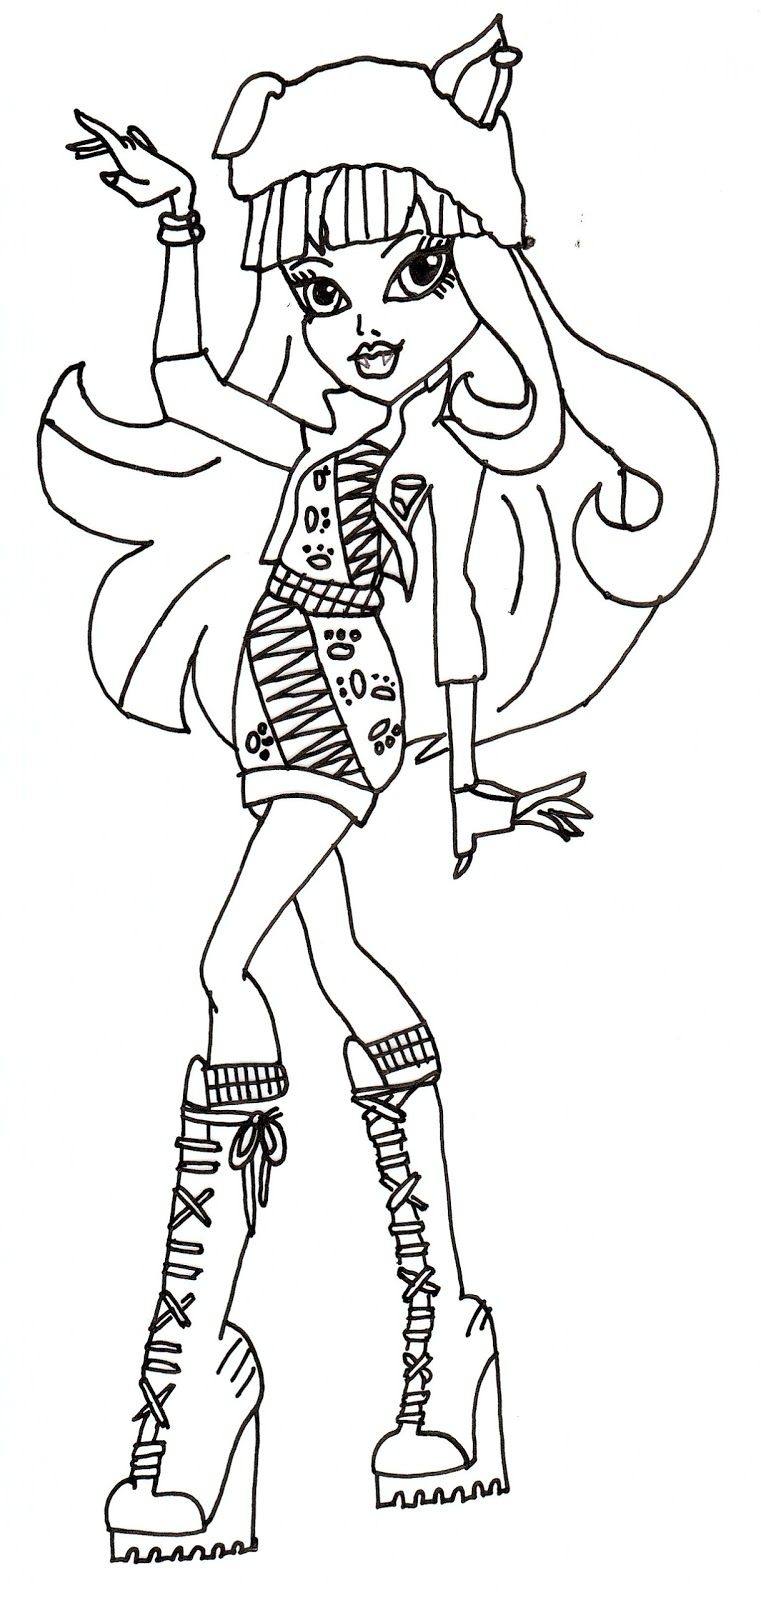 Download Free Printable Monster High Coloring Pages: May 2013